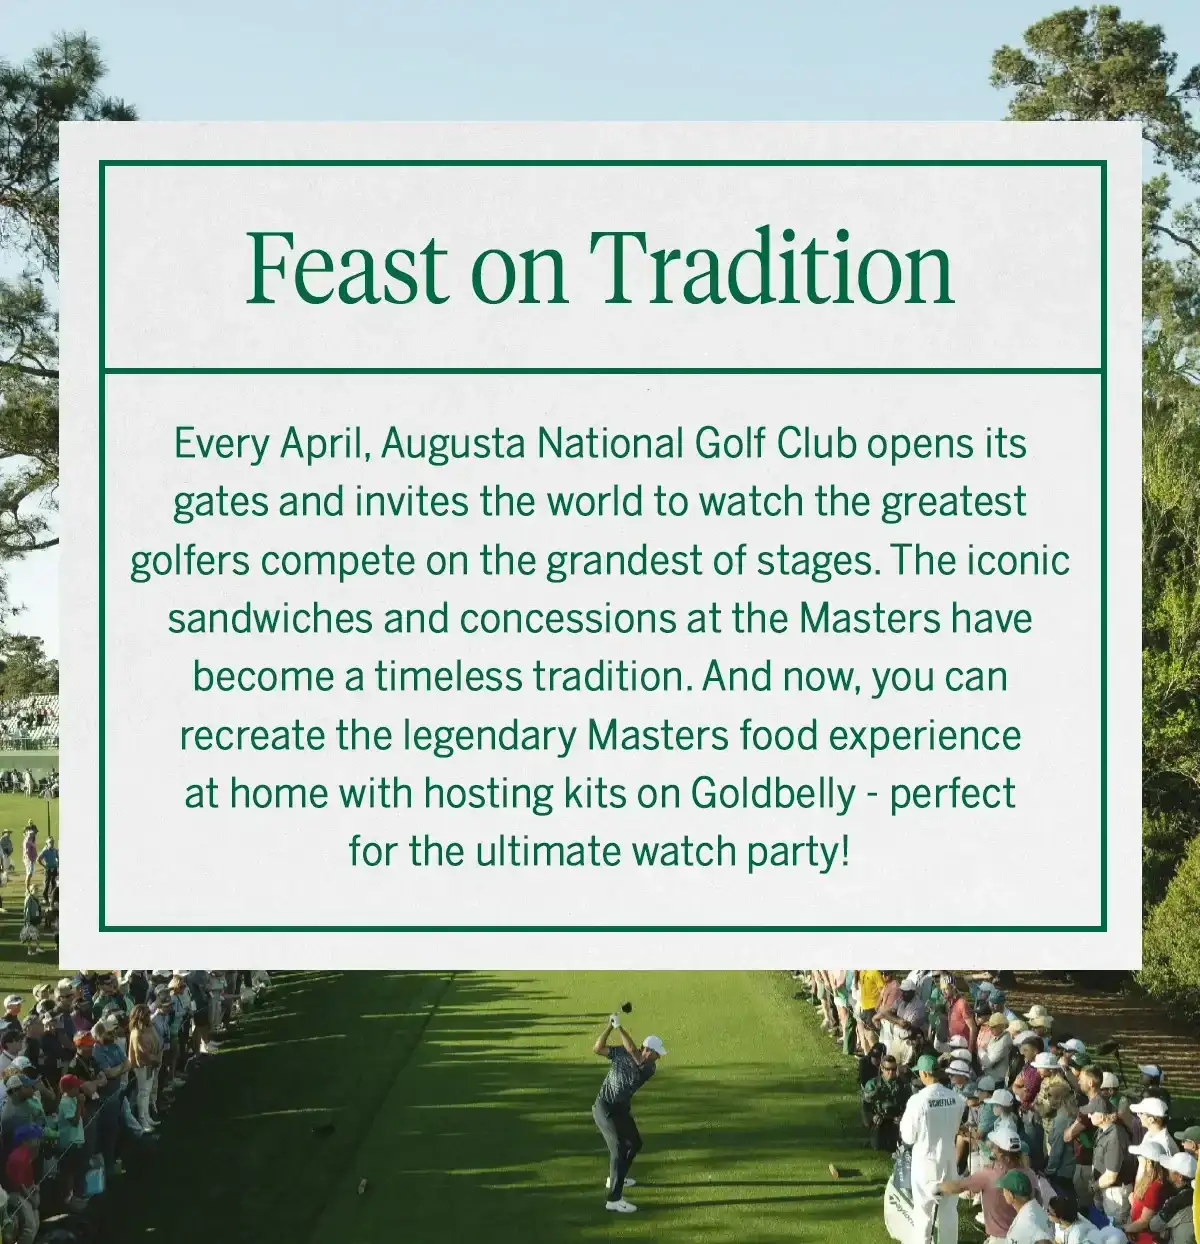 Feast on Tradition